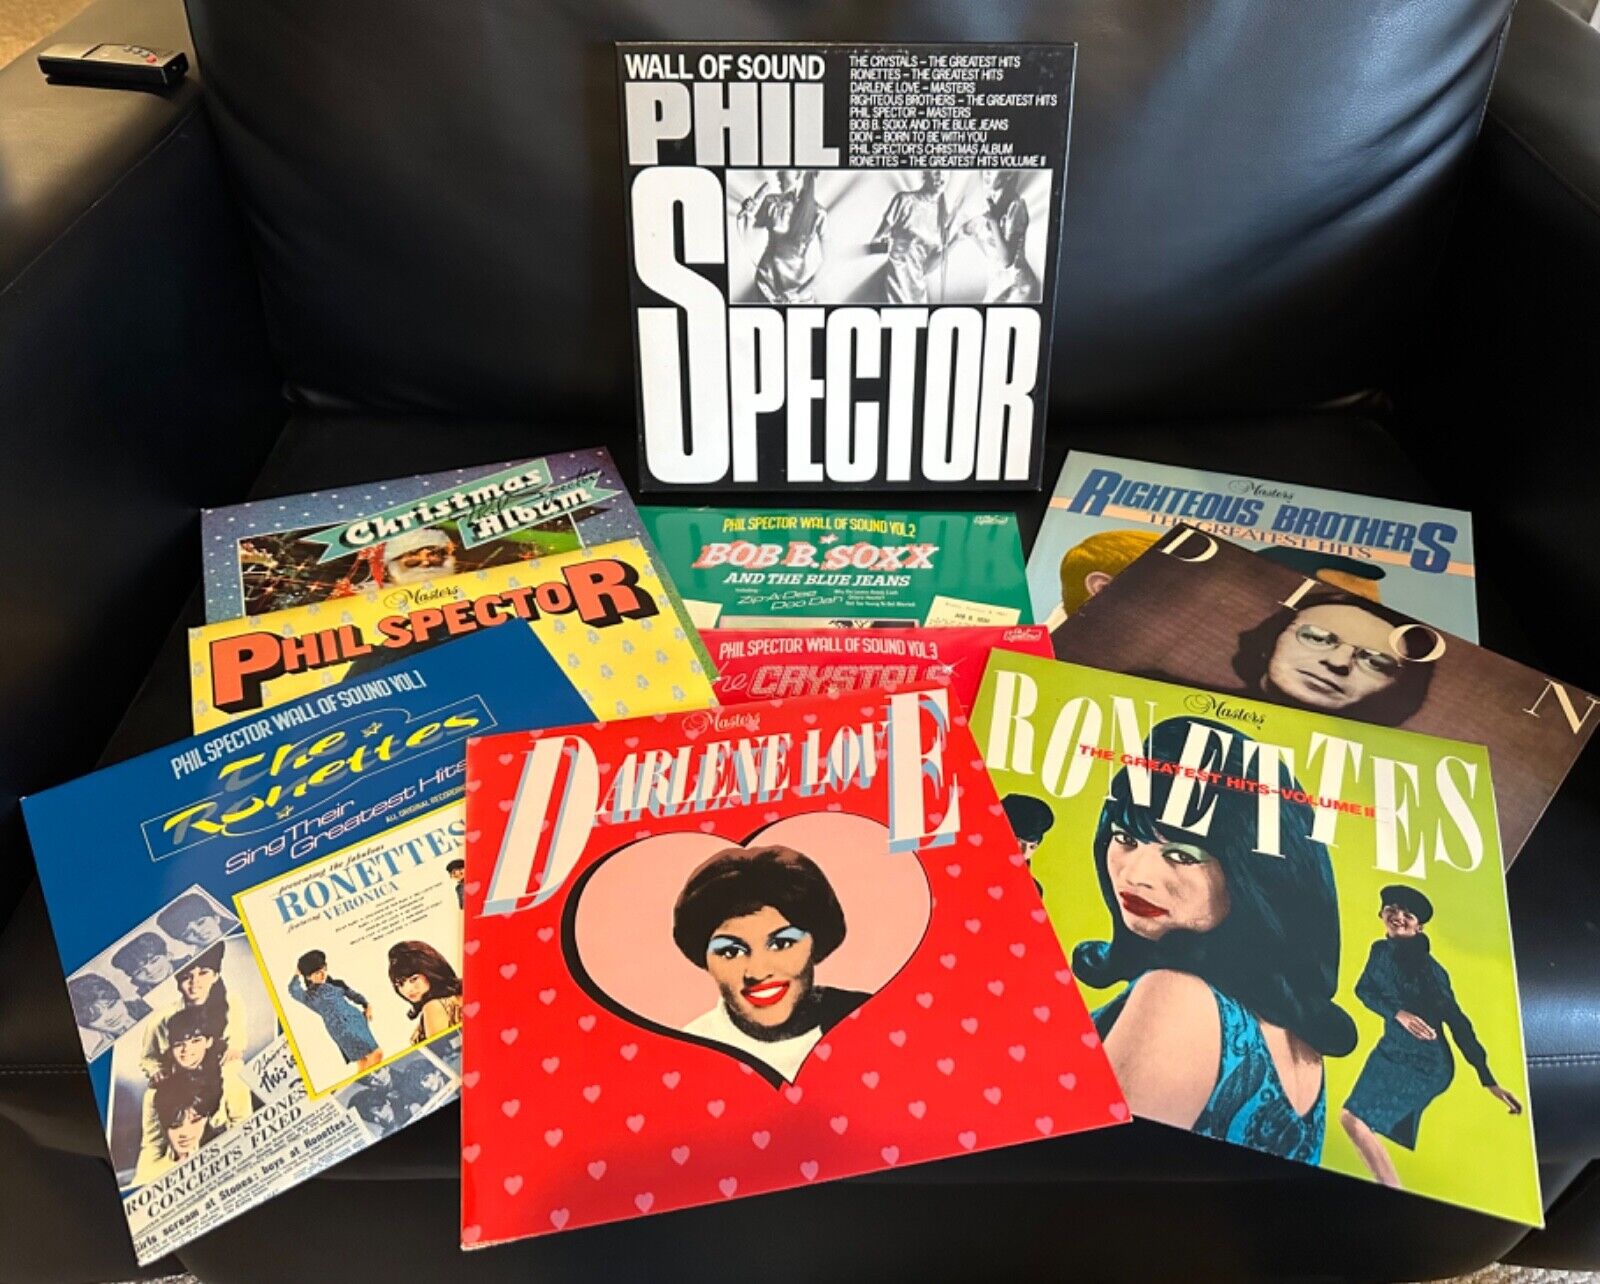 PHIL SPECTOR ‎THE WALL OF SOUND 9x LP Box Set Vinyl UK 1981 Brand New Condition 